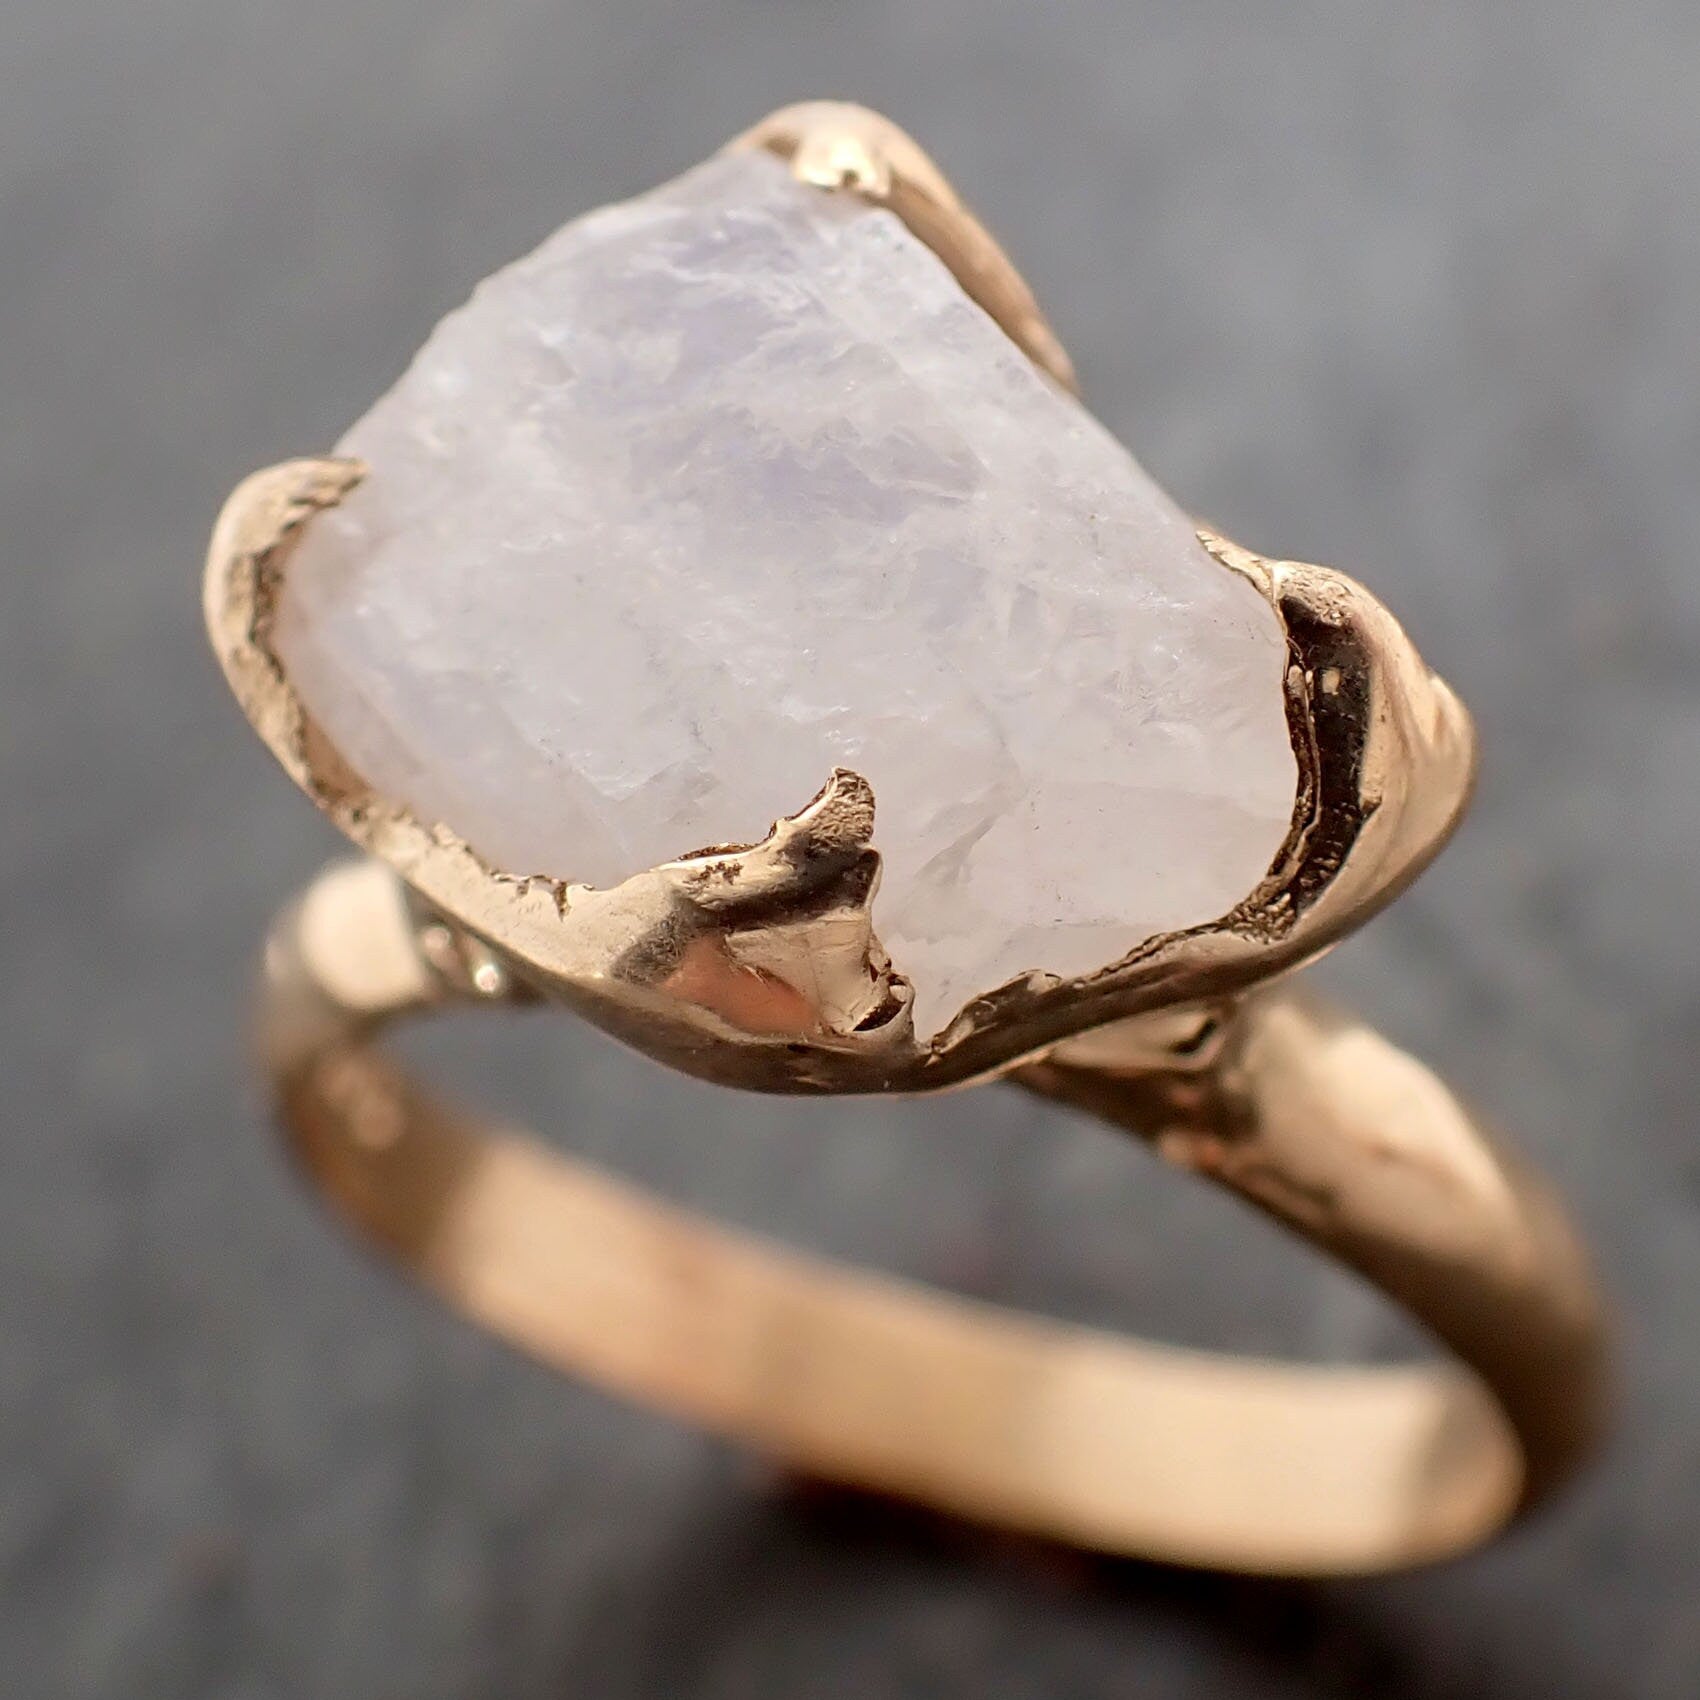 Rough Moonstone 14k Gold Ring Gemstone Solitaire recycled statement cocktail statement 2948